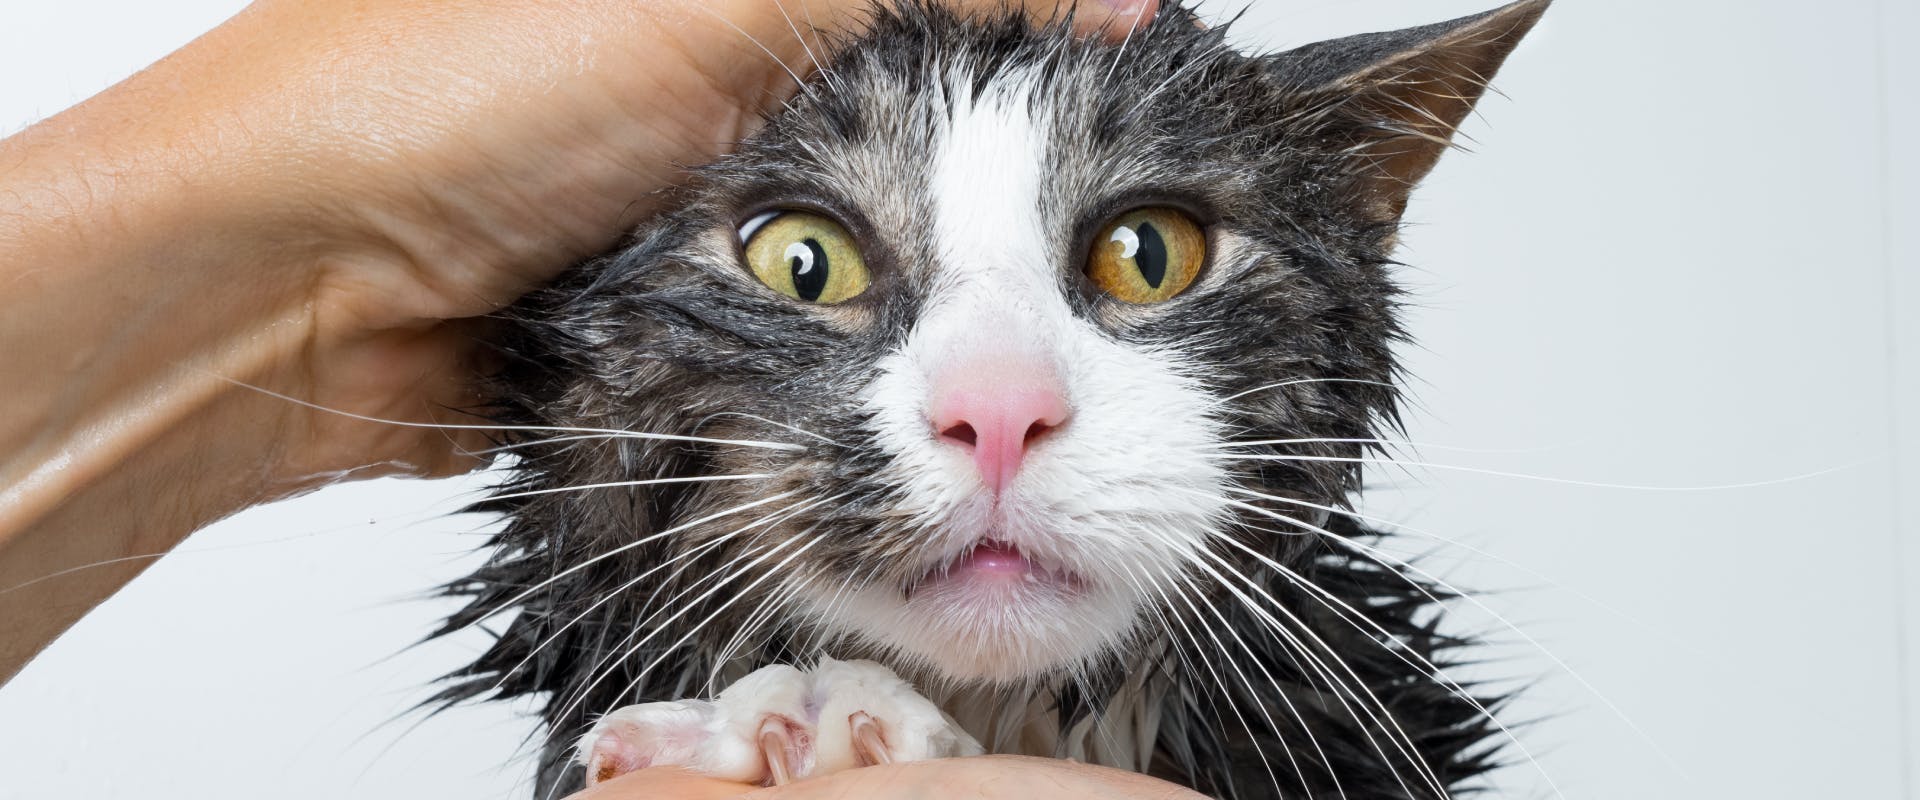 A cat being washed.